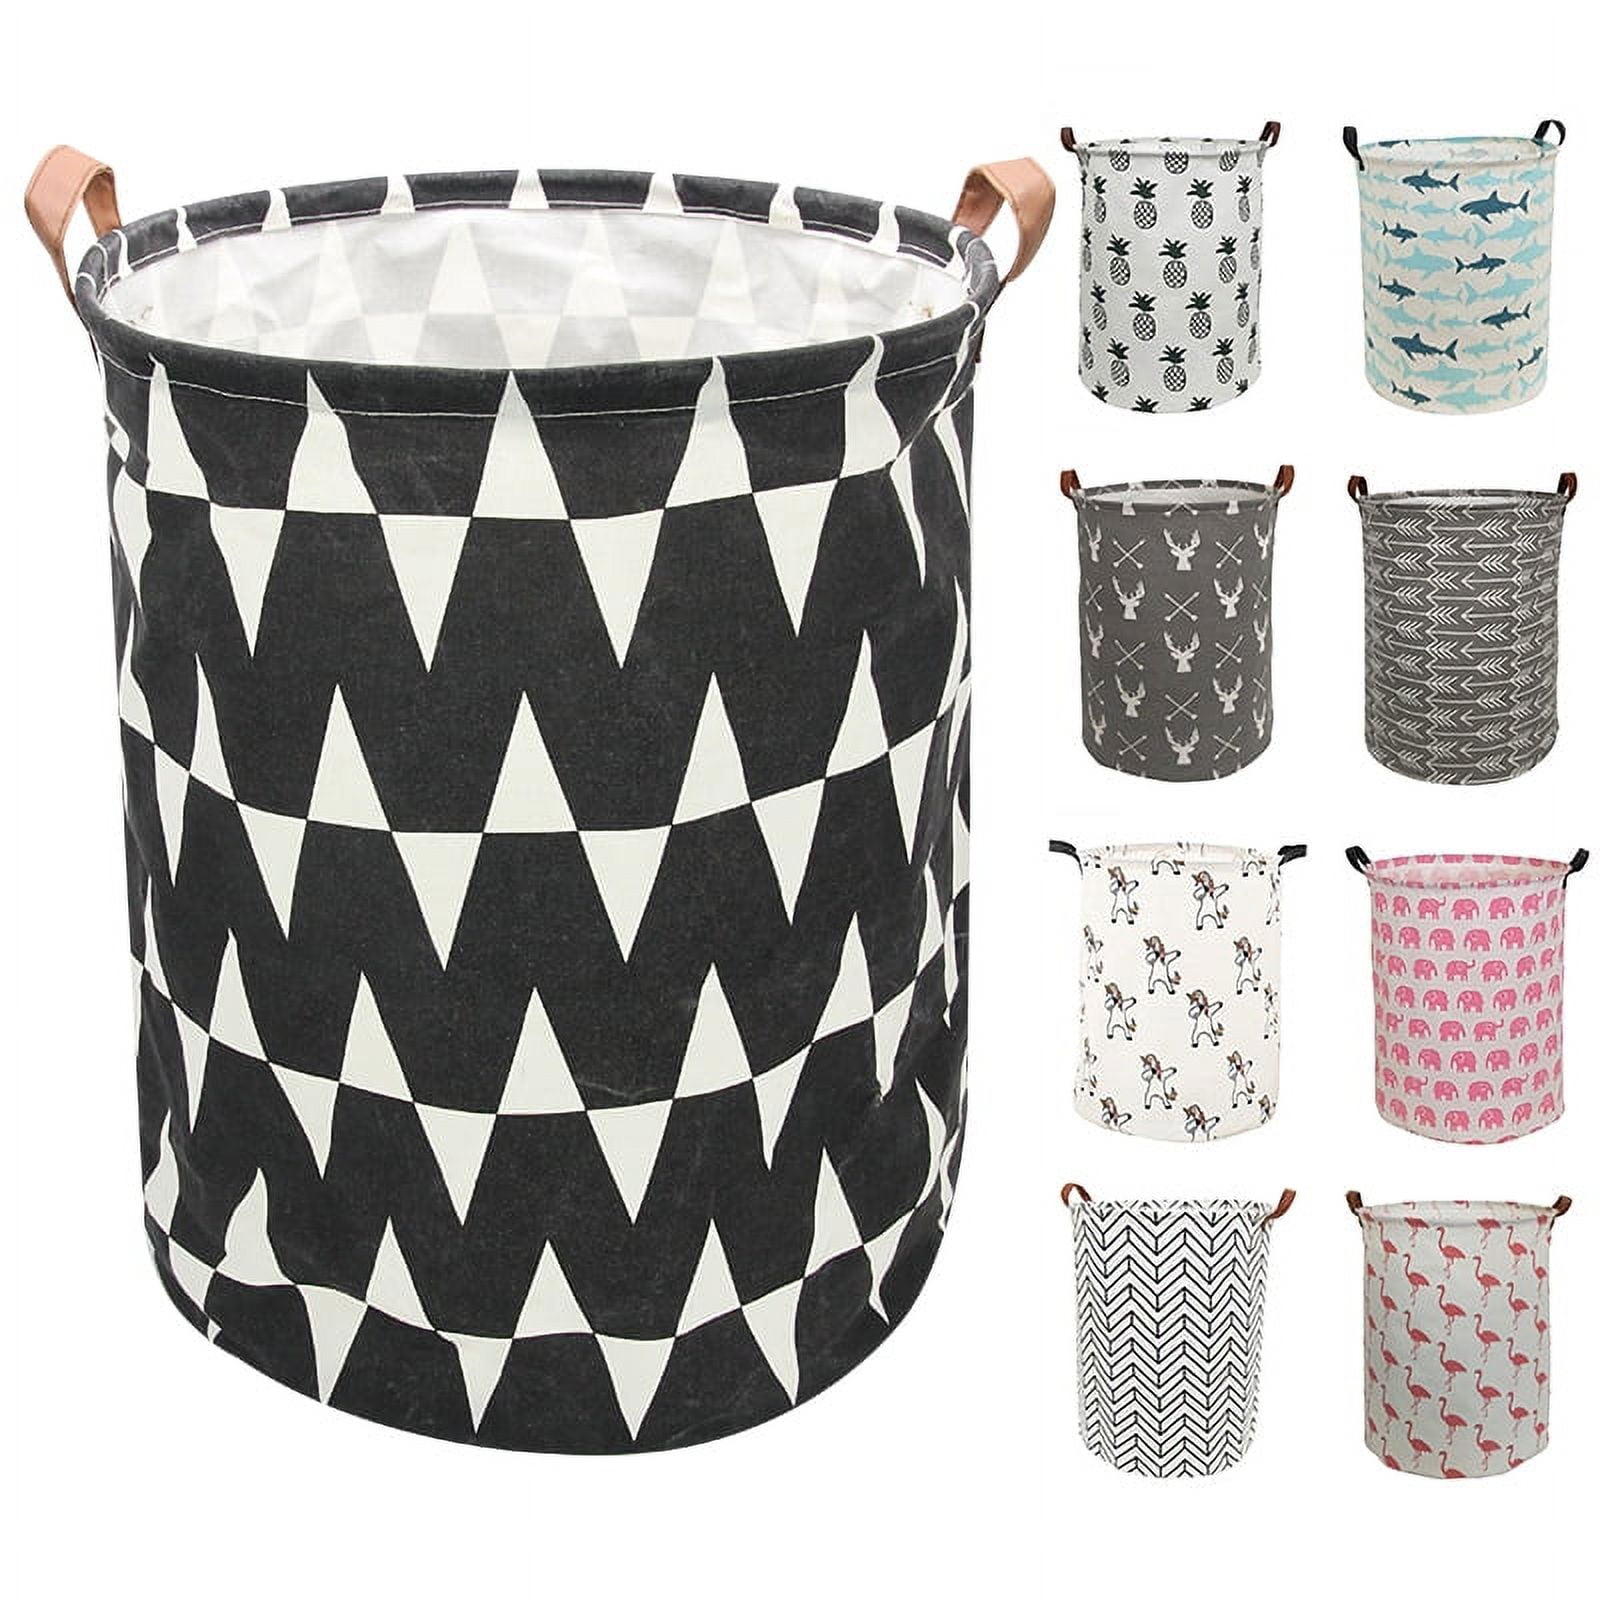 AUCHEN Large Collapsible Laundry Hamper with Handles,Round Storage ...